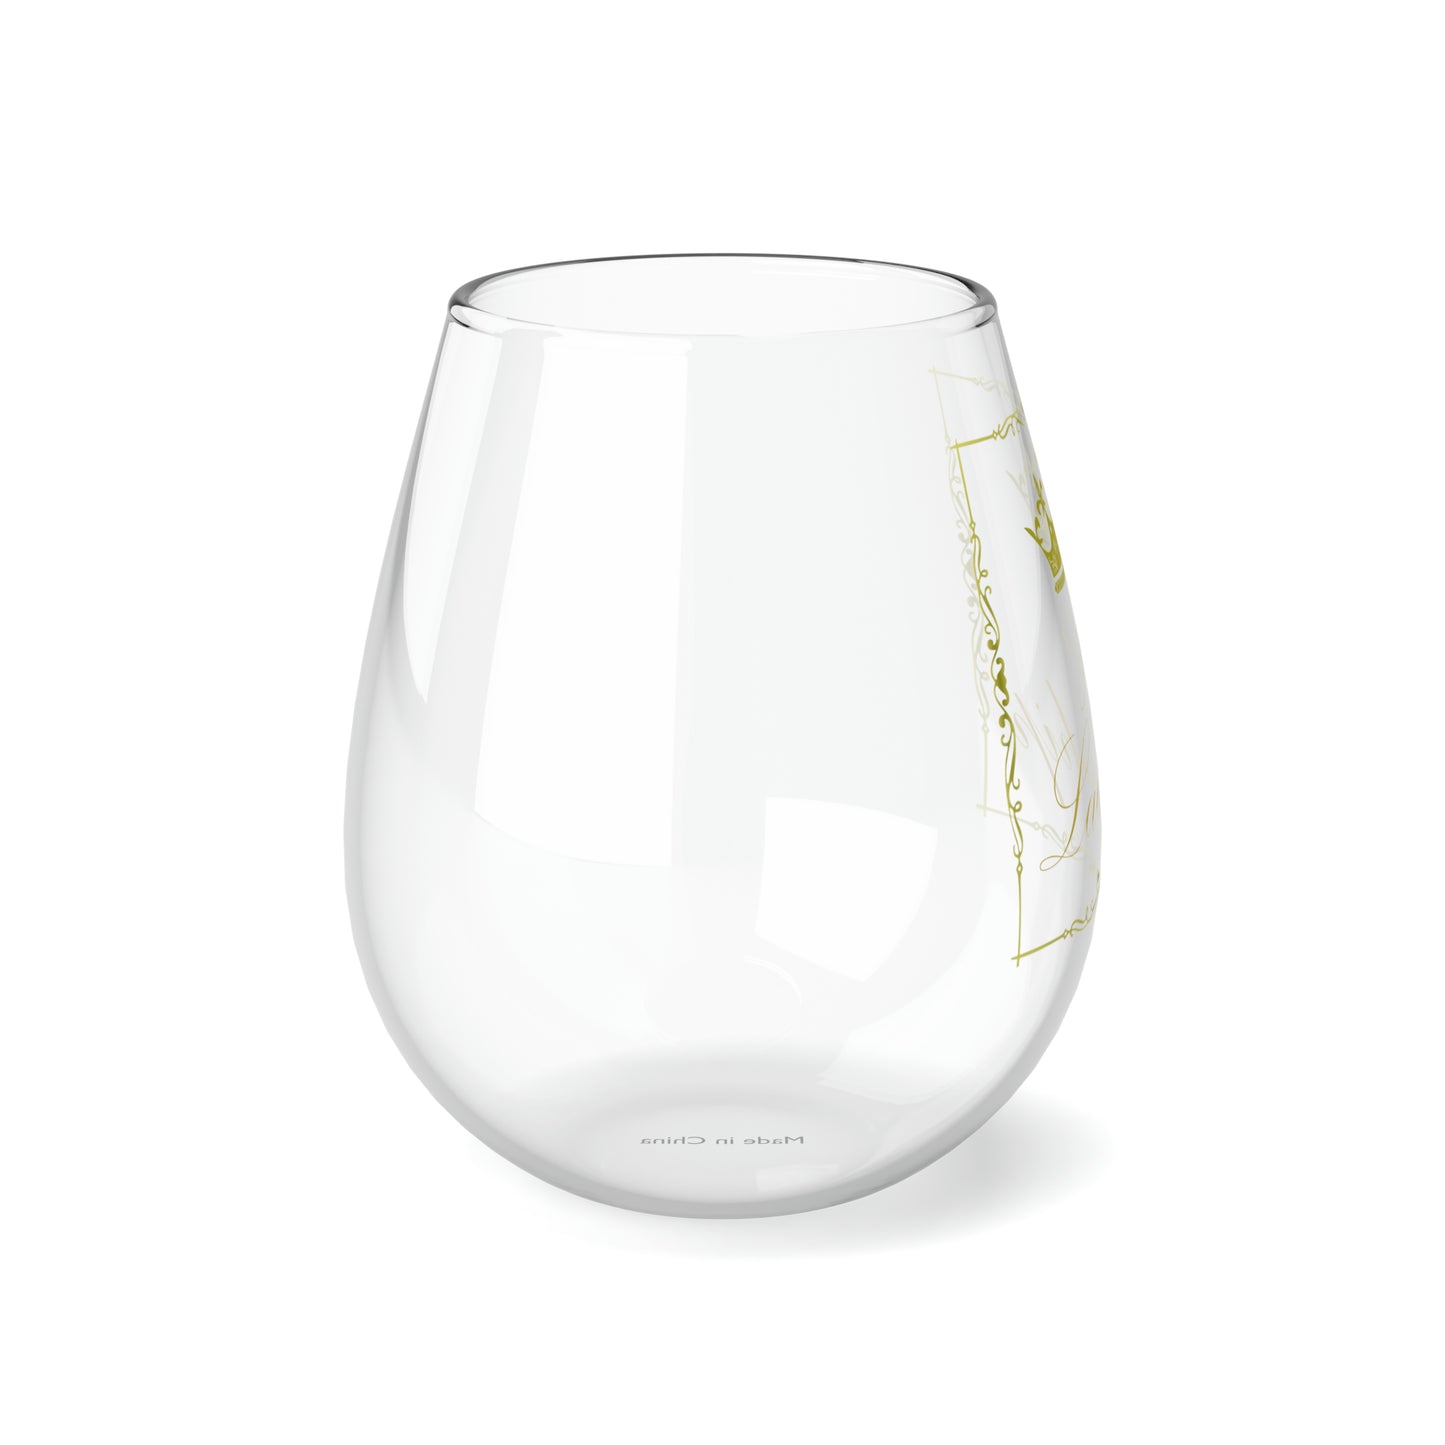 Her Ladyship Stemless Wine Glass, 11.75oz, Gift For Ladies